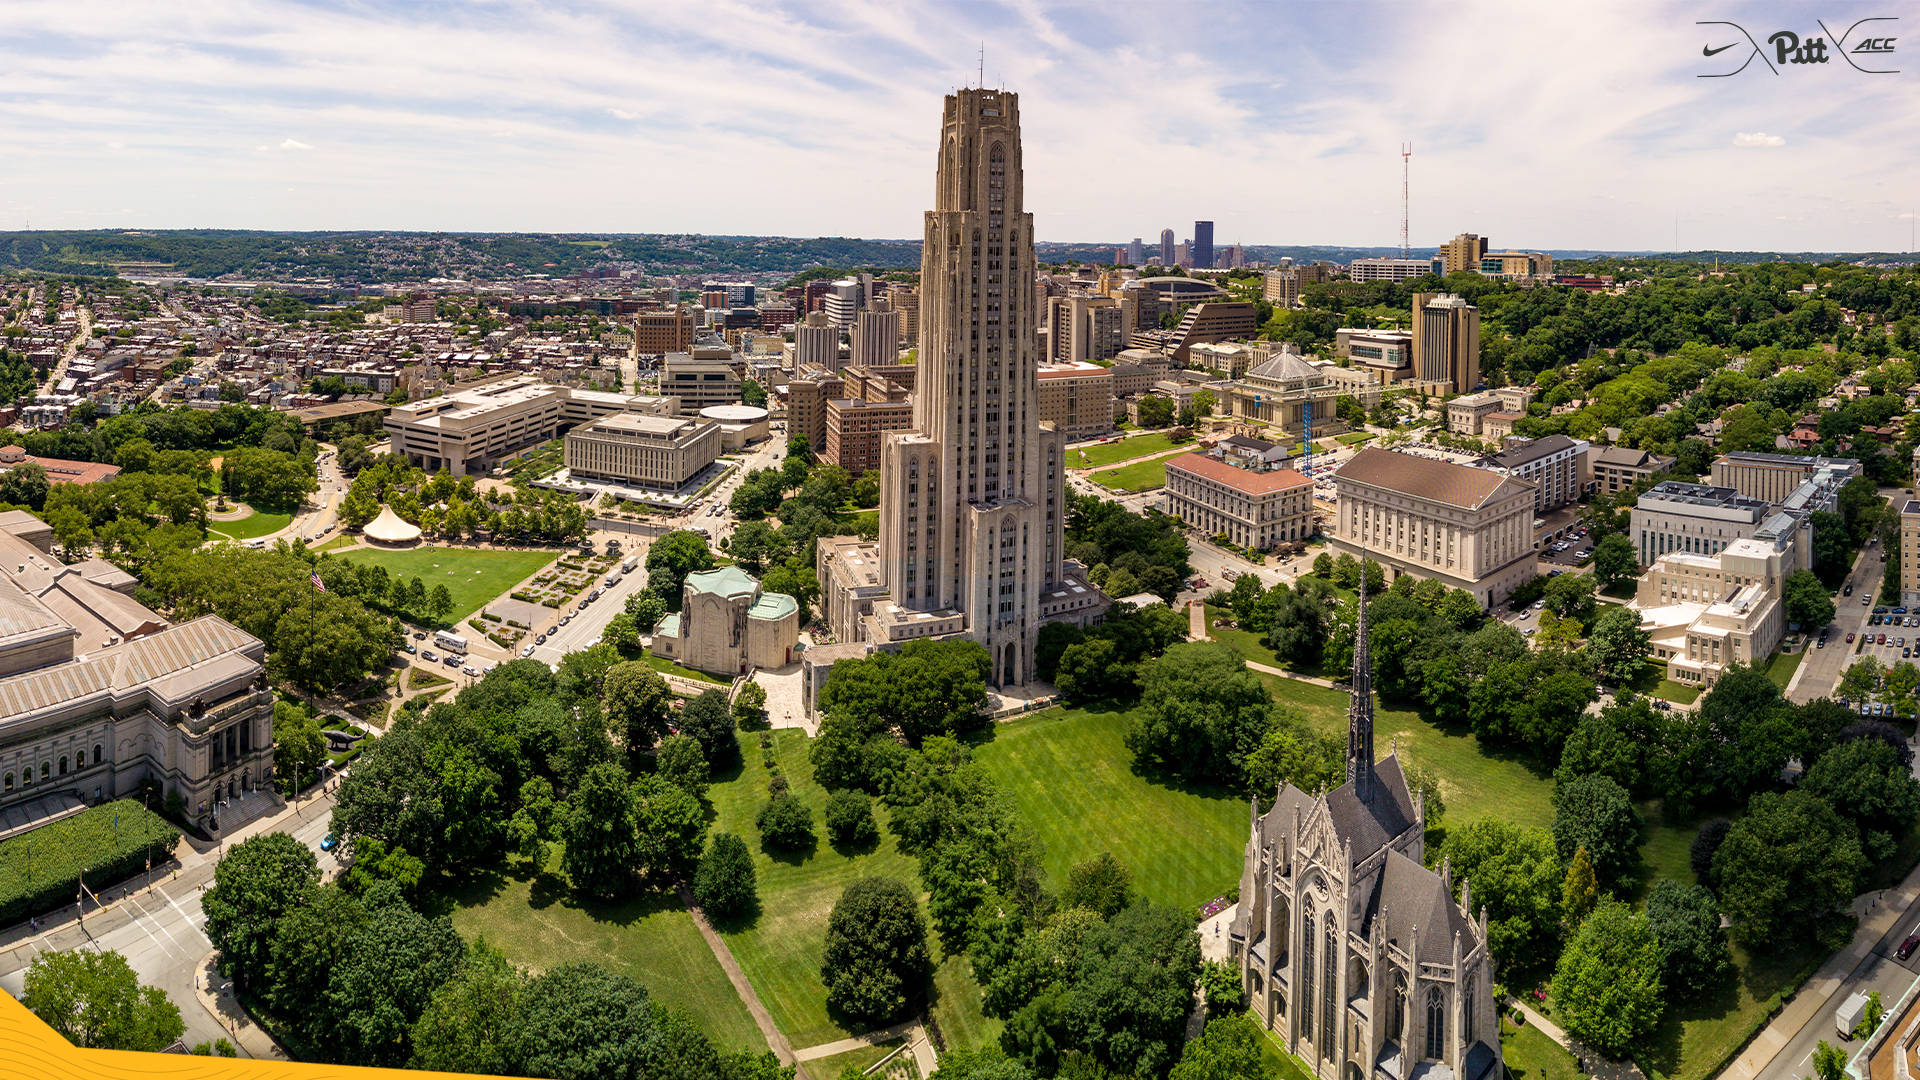 University Of Pittsburgh Aerial View Background